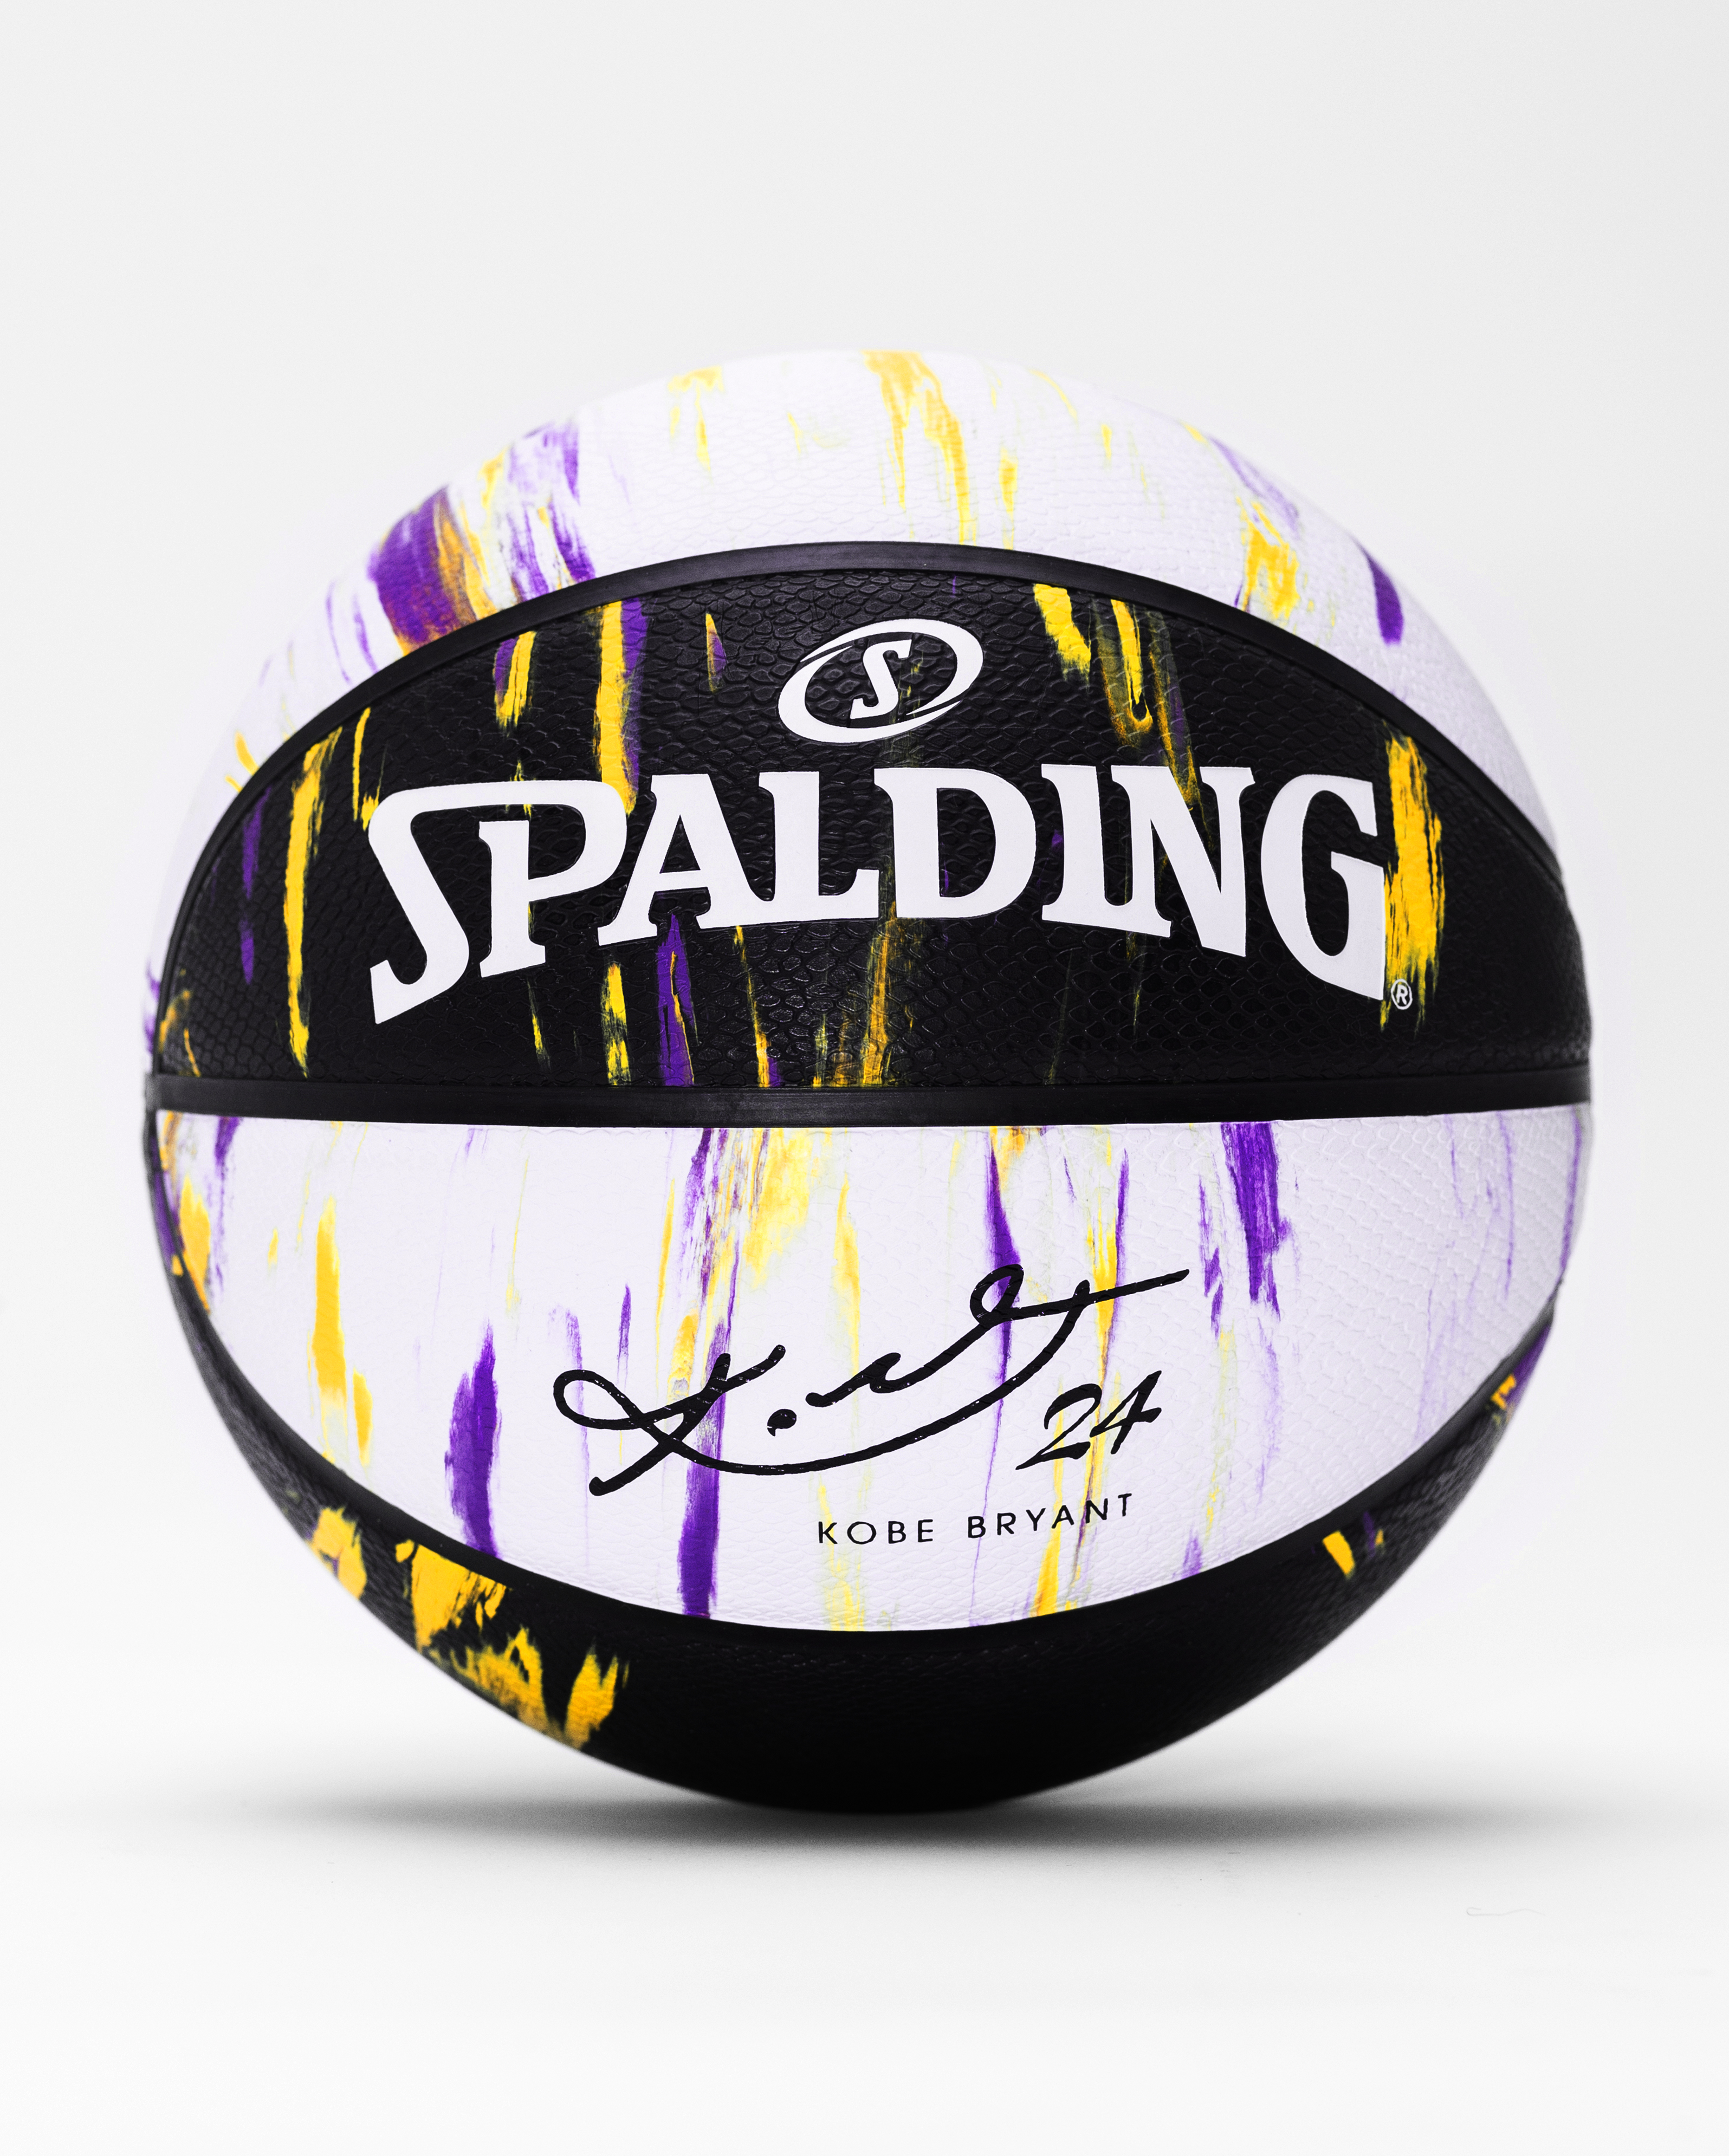 Spalding X Kobe Bryant Marble Series Limited Edition Basketball IN HAND 